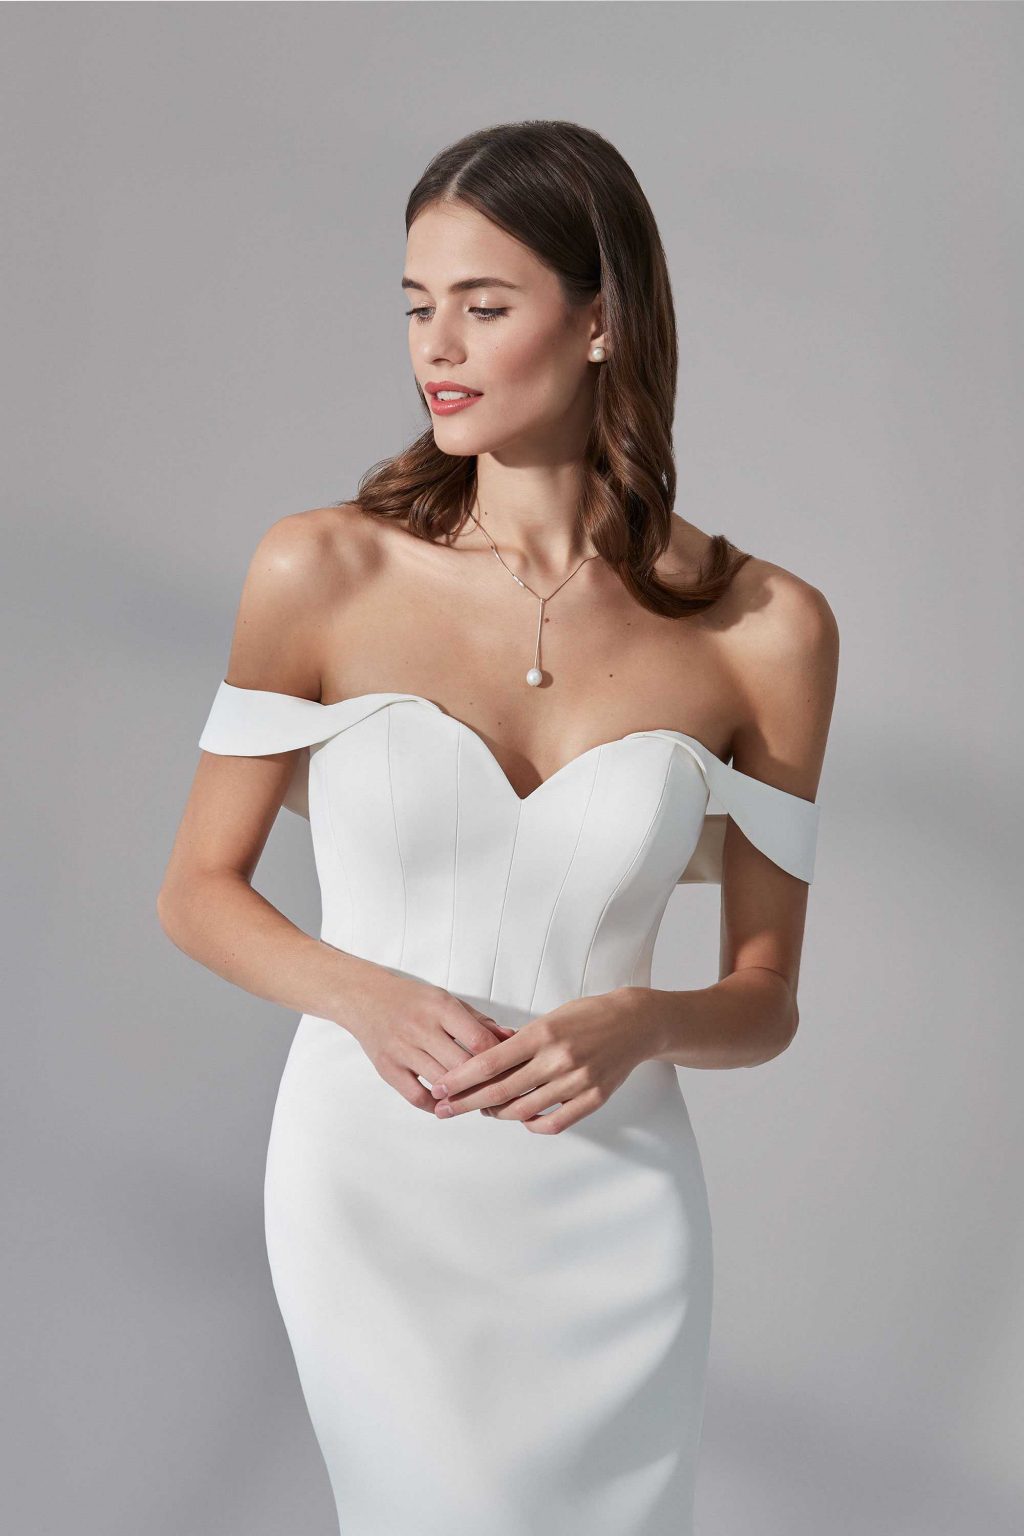 Sweet & Sexy Off-The-Shoulder Wedding Dresses For The Trendsetter